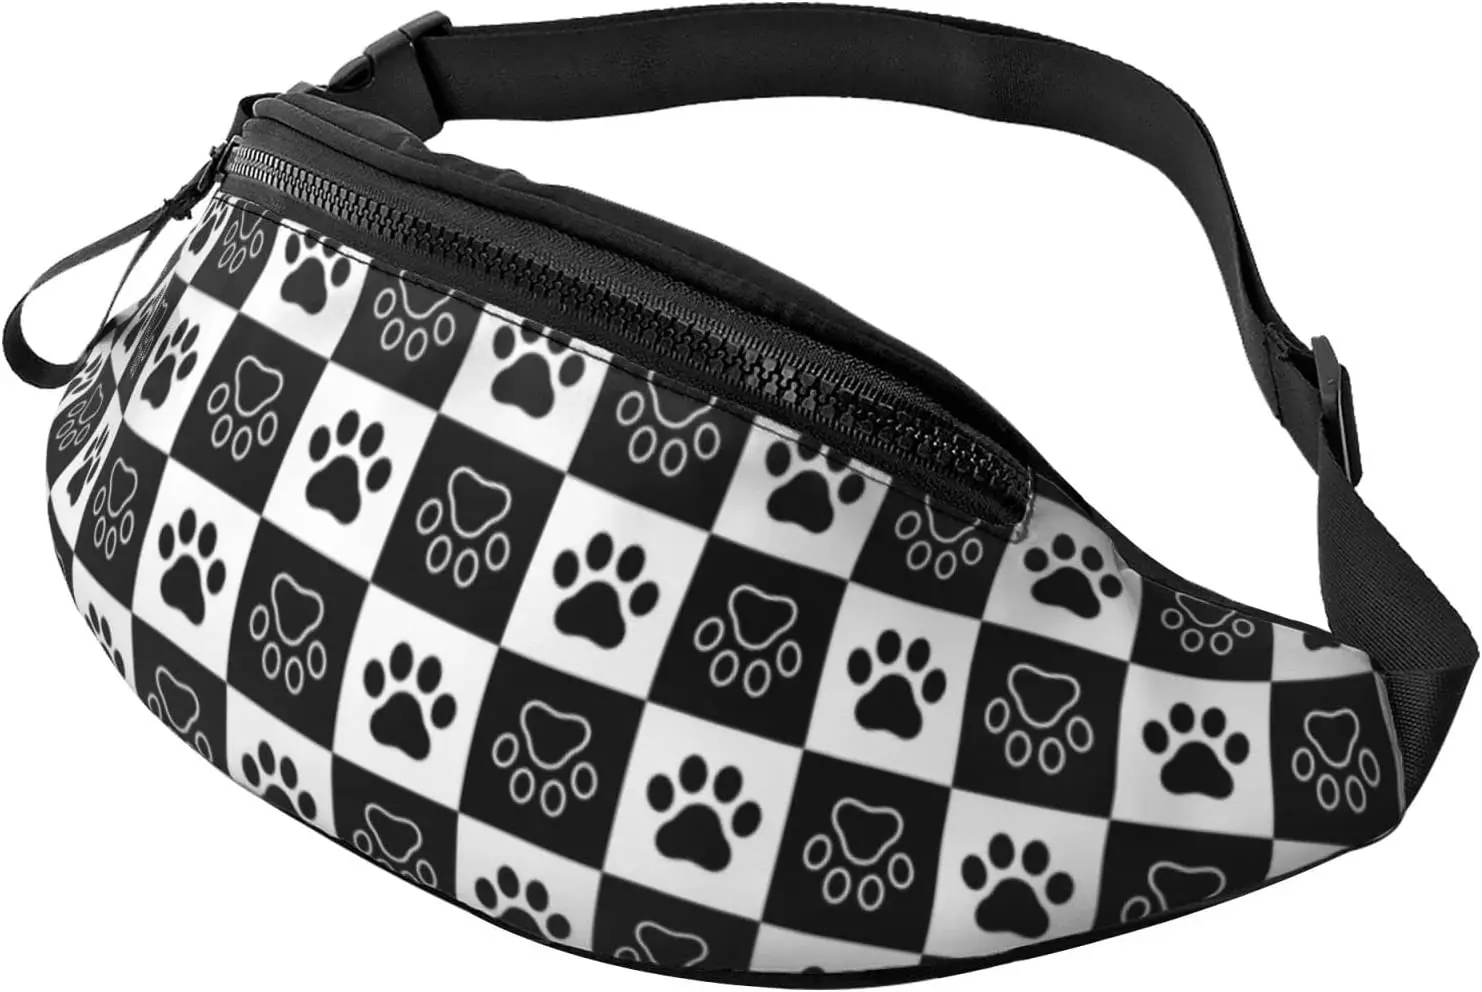 

Dog Paw Black and White Plaid Fanny Packs for Women Mens Adjustable Waist Bag Crossbody Fanny Pack for Running Hiking Cycling